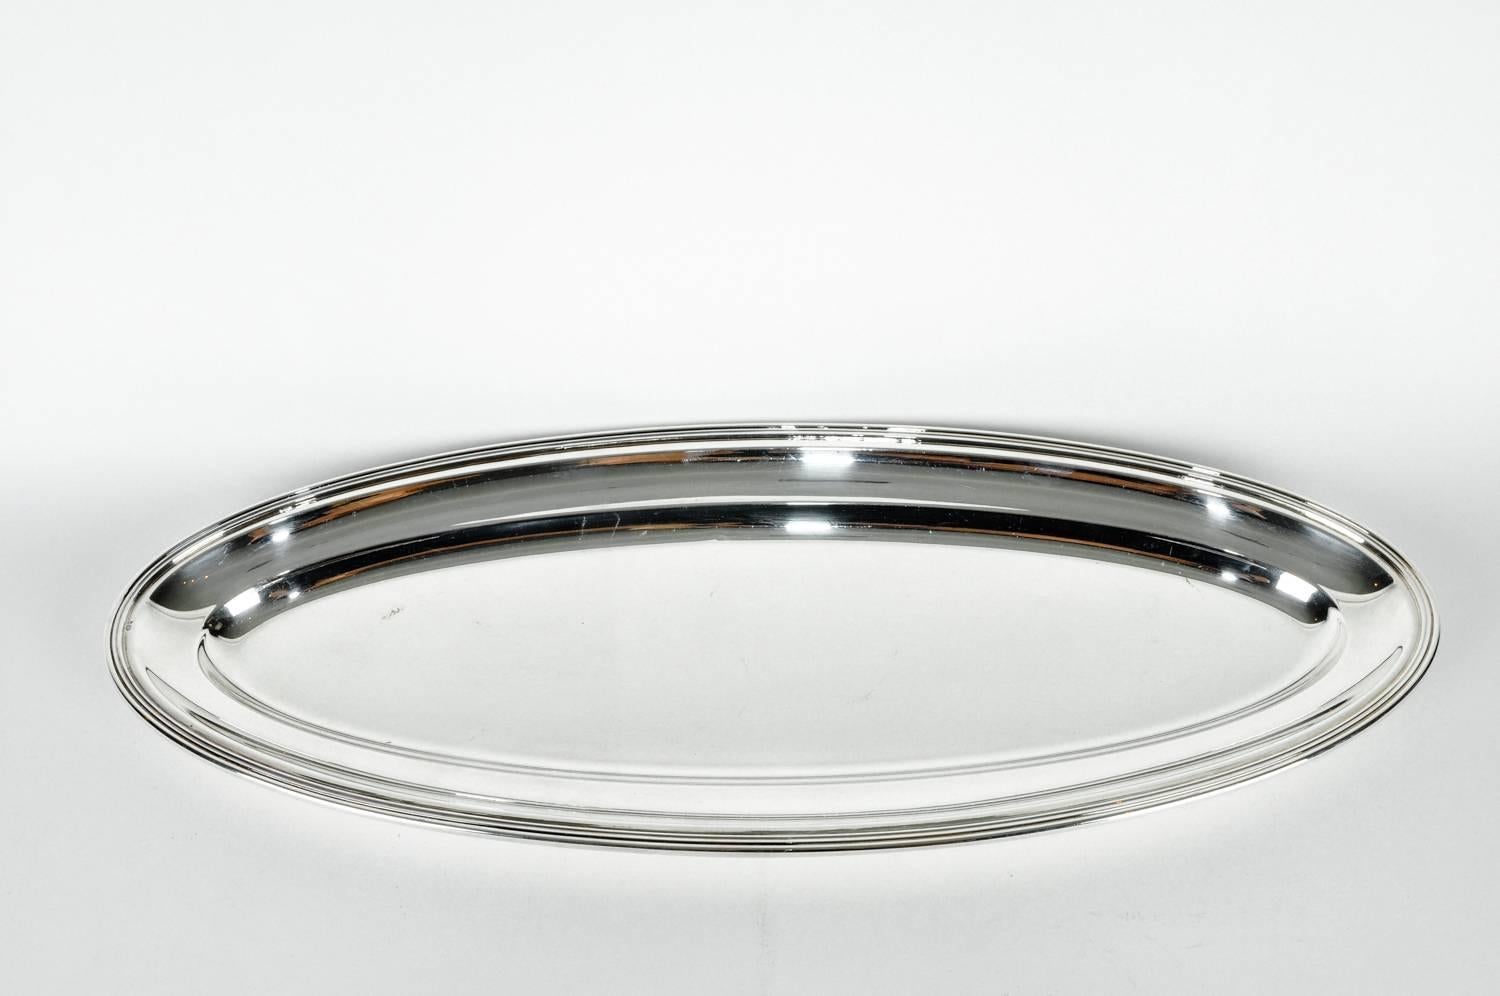 Vintage Oval Silver Plated Art Deco Style Barware or Serving Tray 2